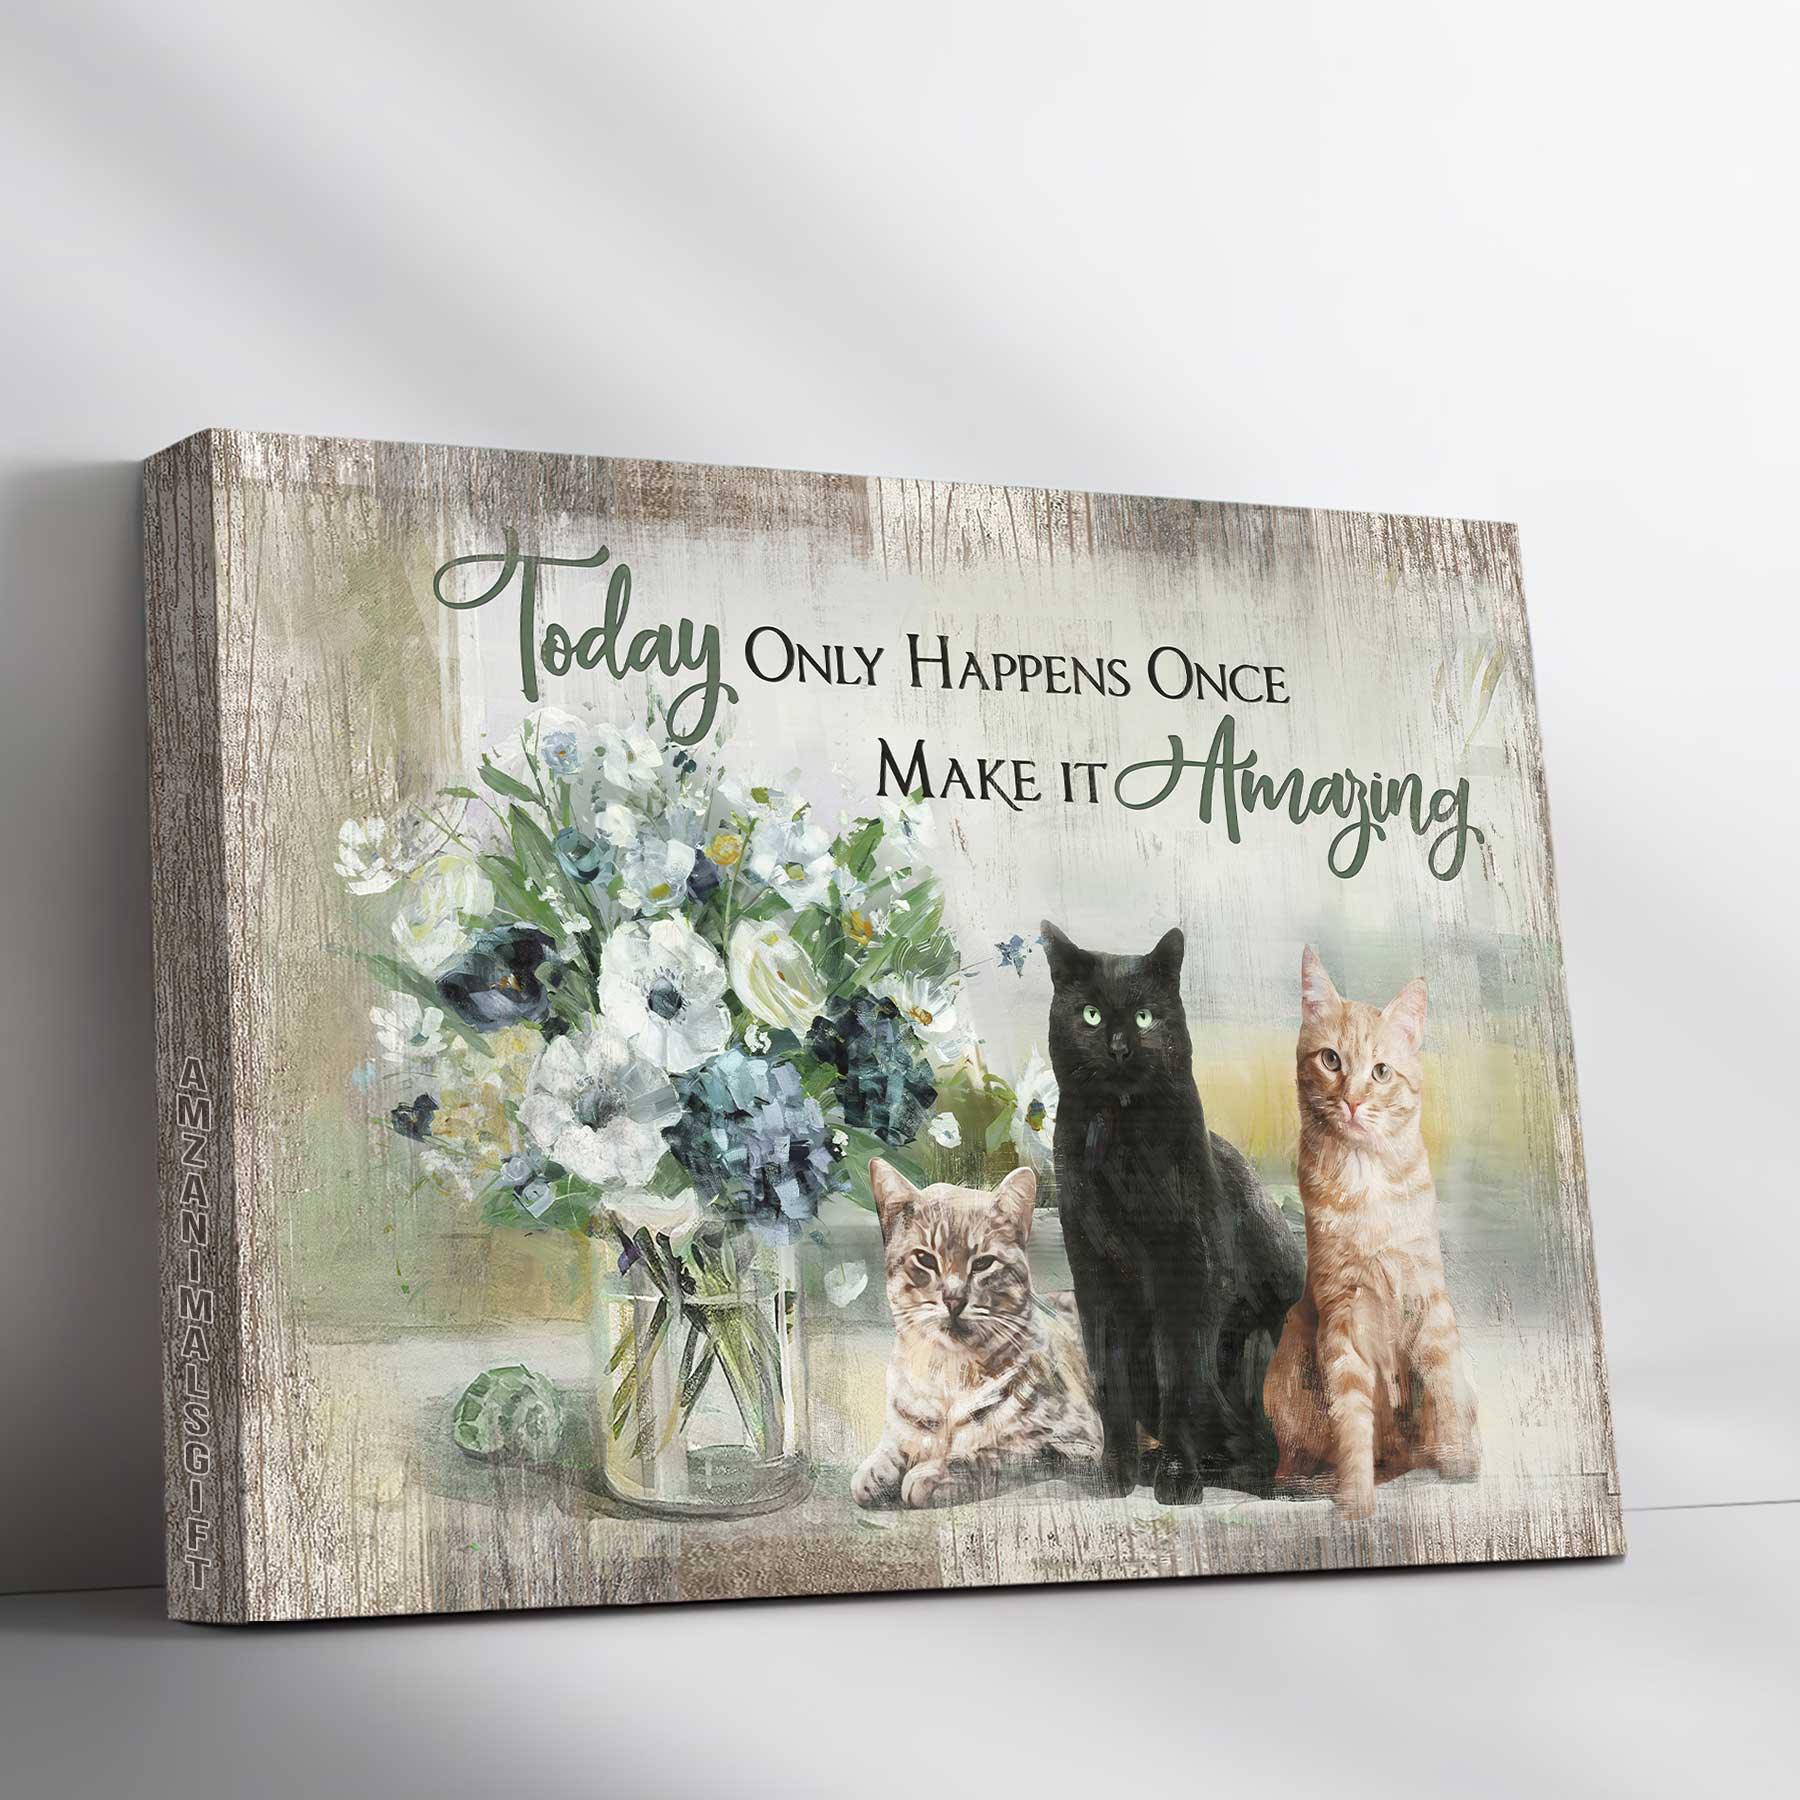 Cat & Jesus Premium Wrapped Landscape Canvas - Adorable Cats, Flower Vase, Today Only Happens Once Make It Amazing - Gift For Christian, Cat Lovers - Amzanimalsgift